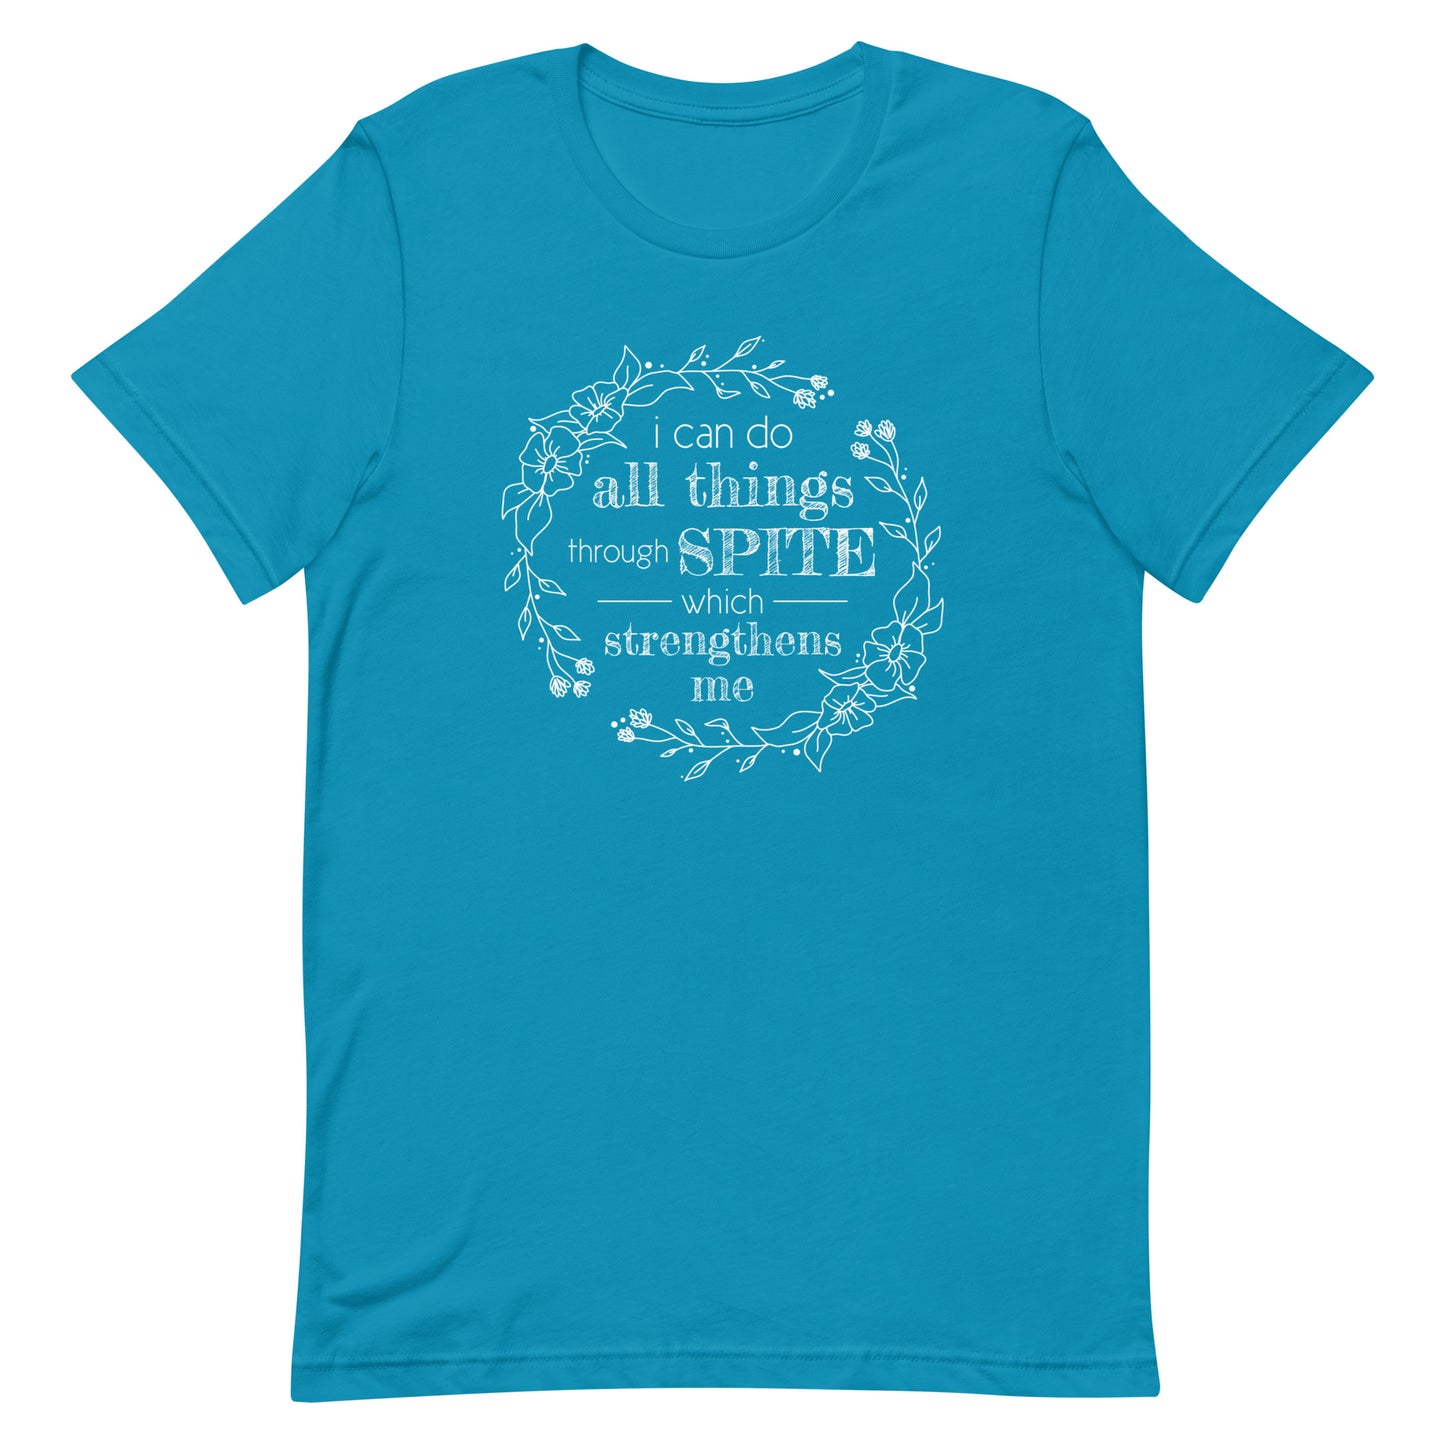 A blue crewneck t-shirt with an illustration of a wreath of flowers. Inside the wreath is text that reads "I can do all things through spite which strengthens me"